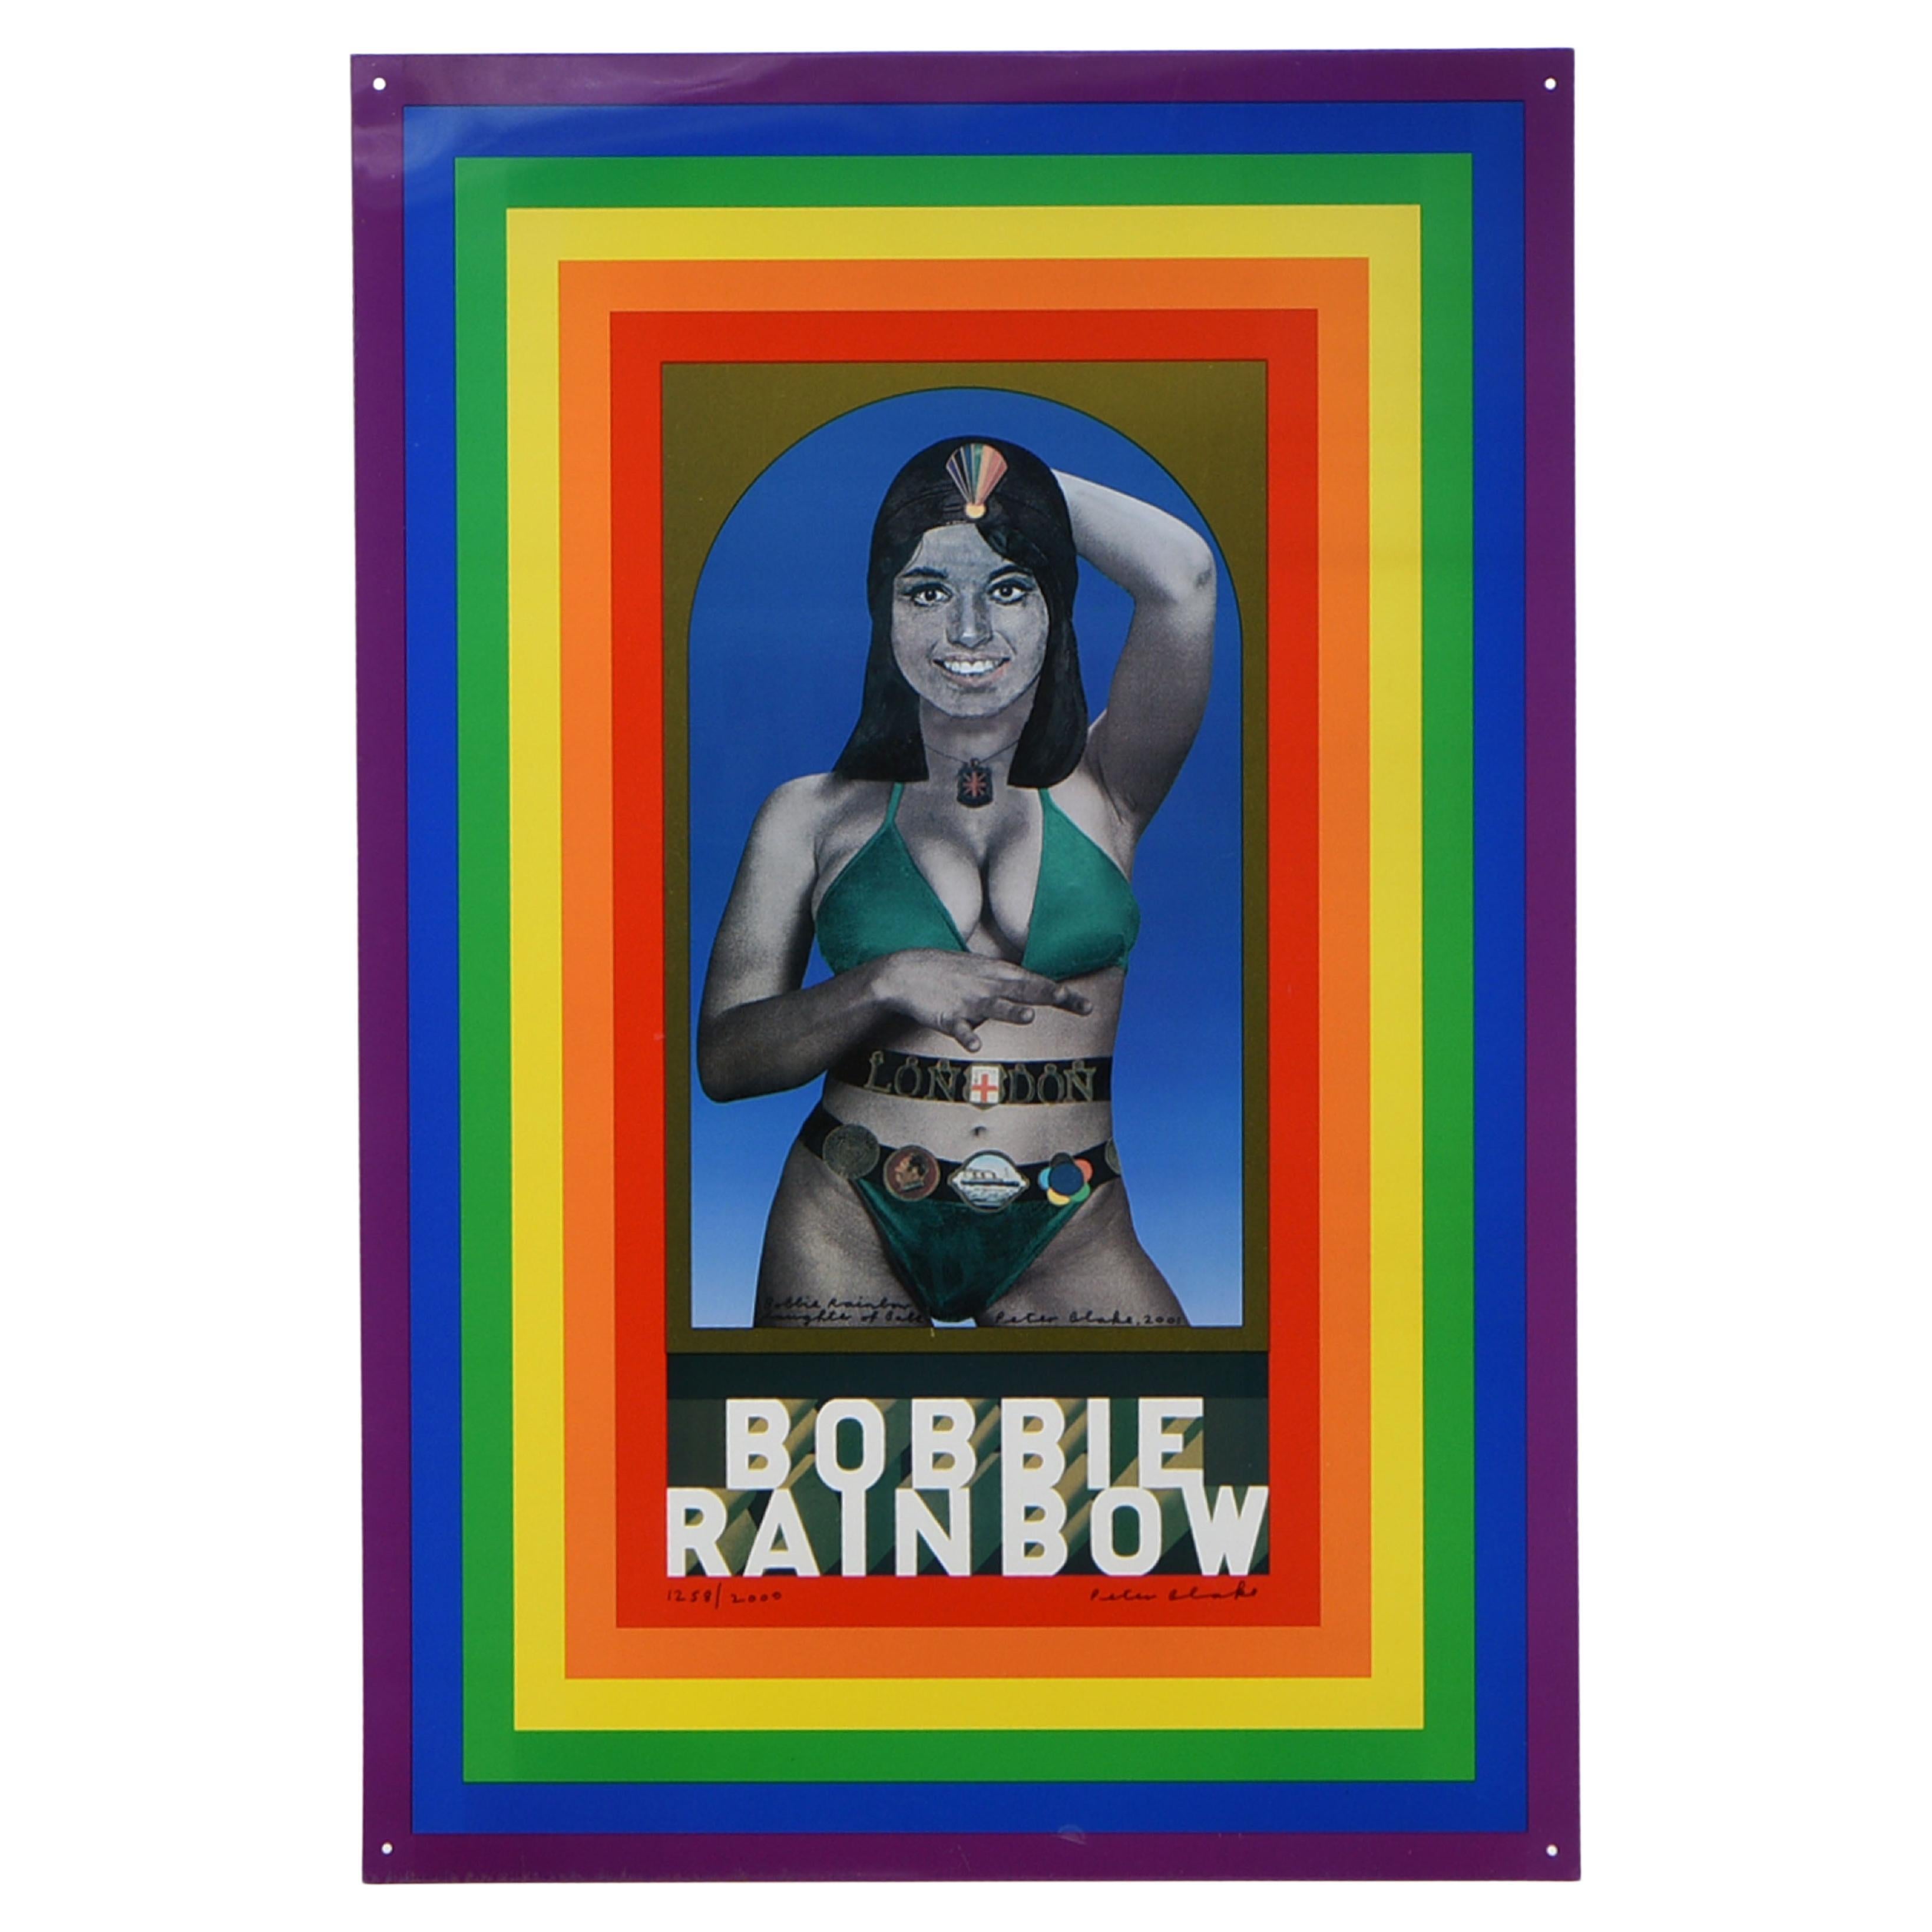 Bobbie Rainbow by Peter Blake Lithoprint on Tin 2001 Signed Pop Art For Sale